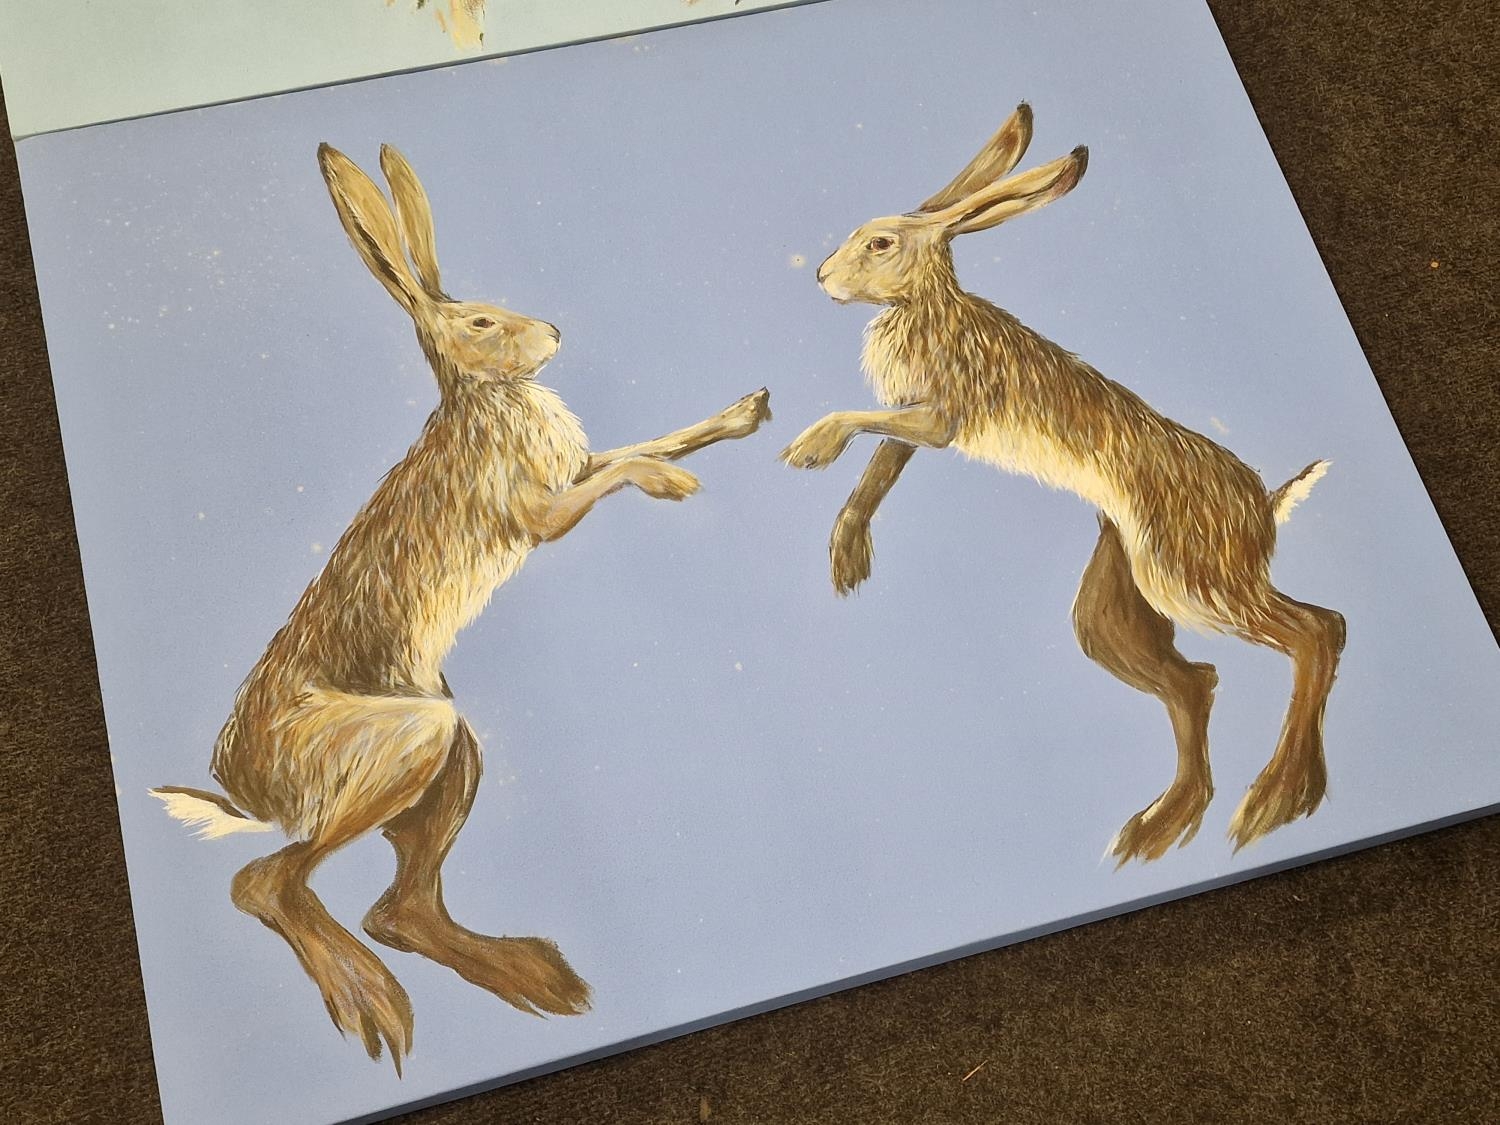 Krysyna Evans: Local artist two contemporary oil on canvas paintings of hares "Dancing Hares" and " - Image 2 of 4